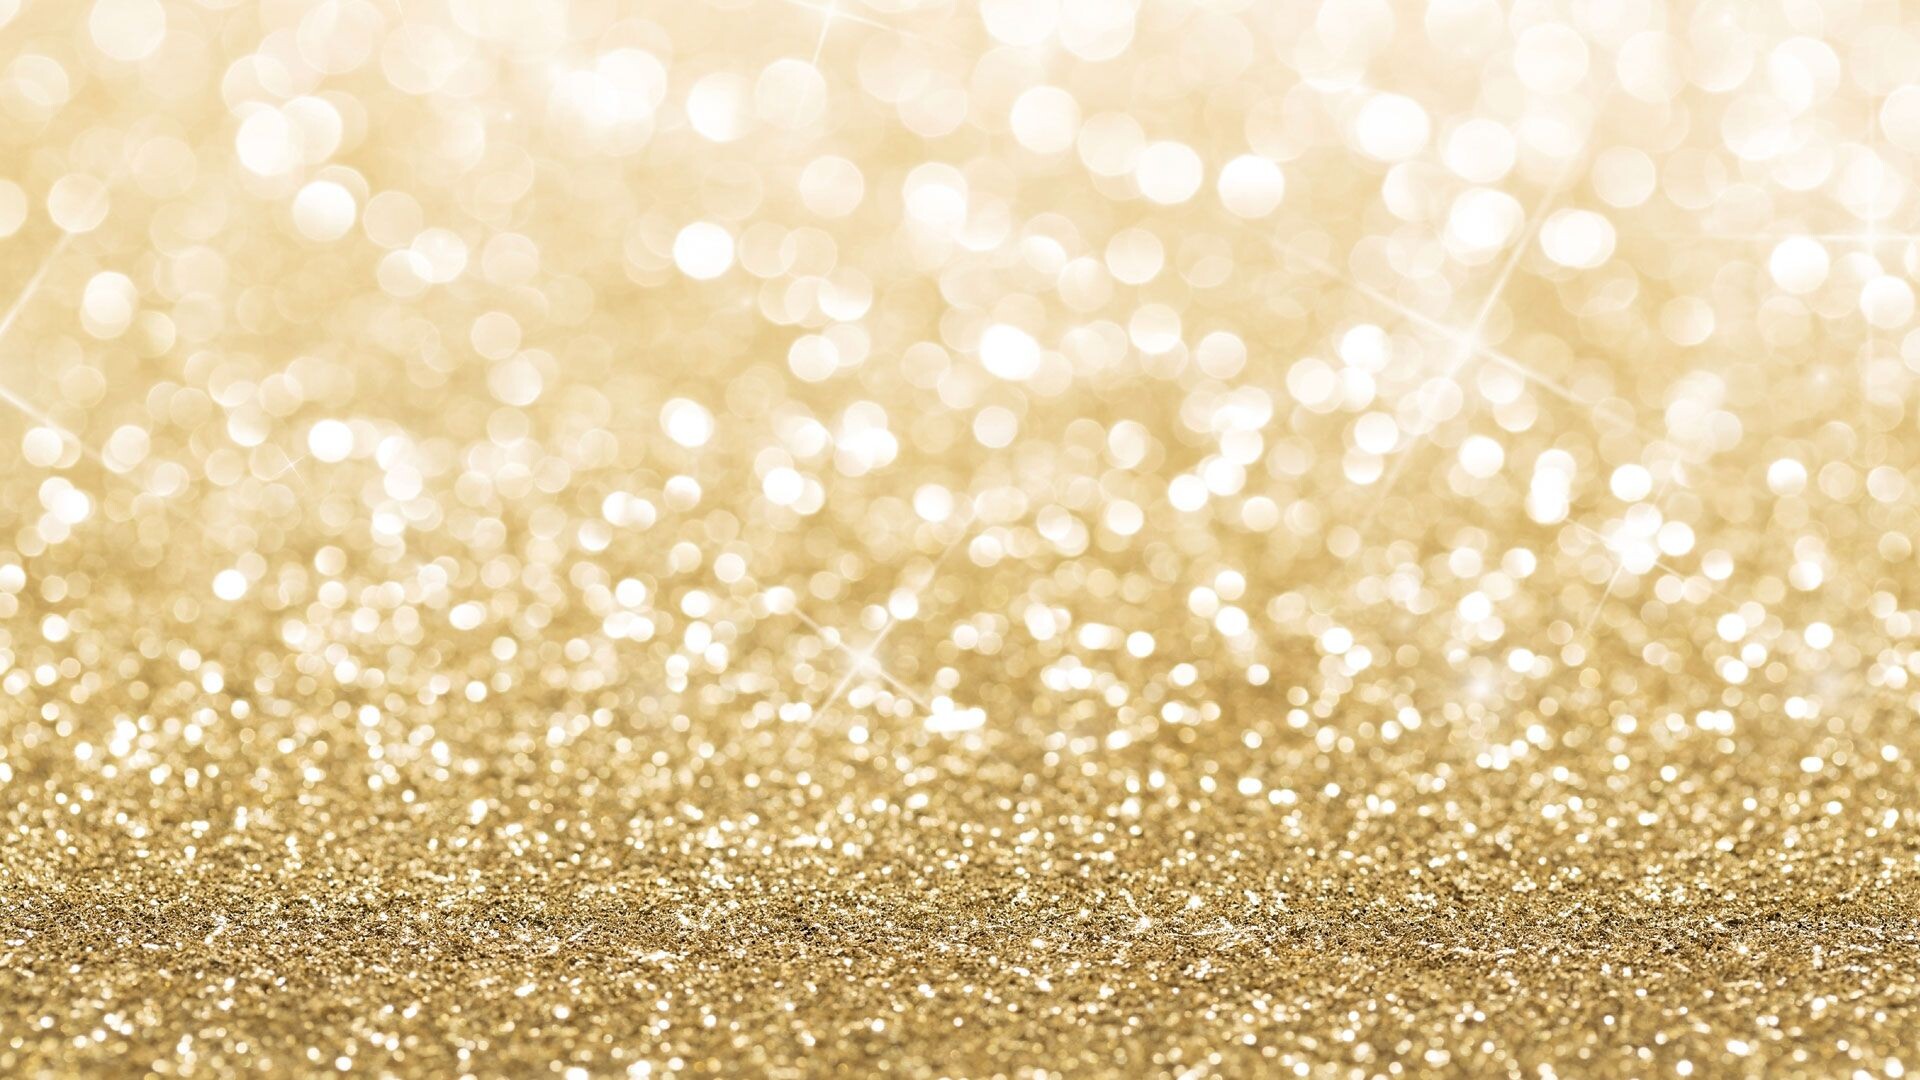 Gold Sparkle: Extra fine golden glitter, A substance consisting of small, reflective particles. 1920x1080 Full HD Wallpaper.